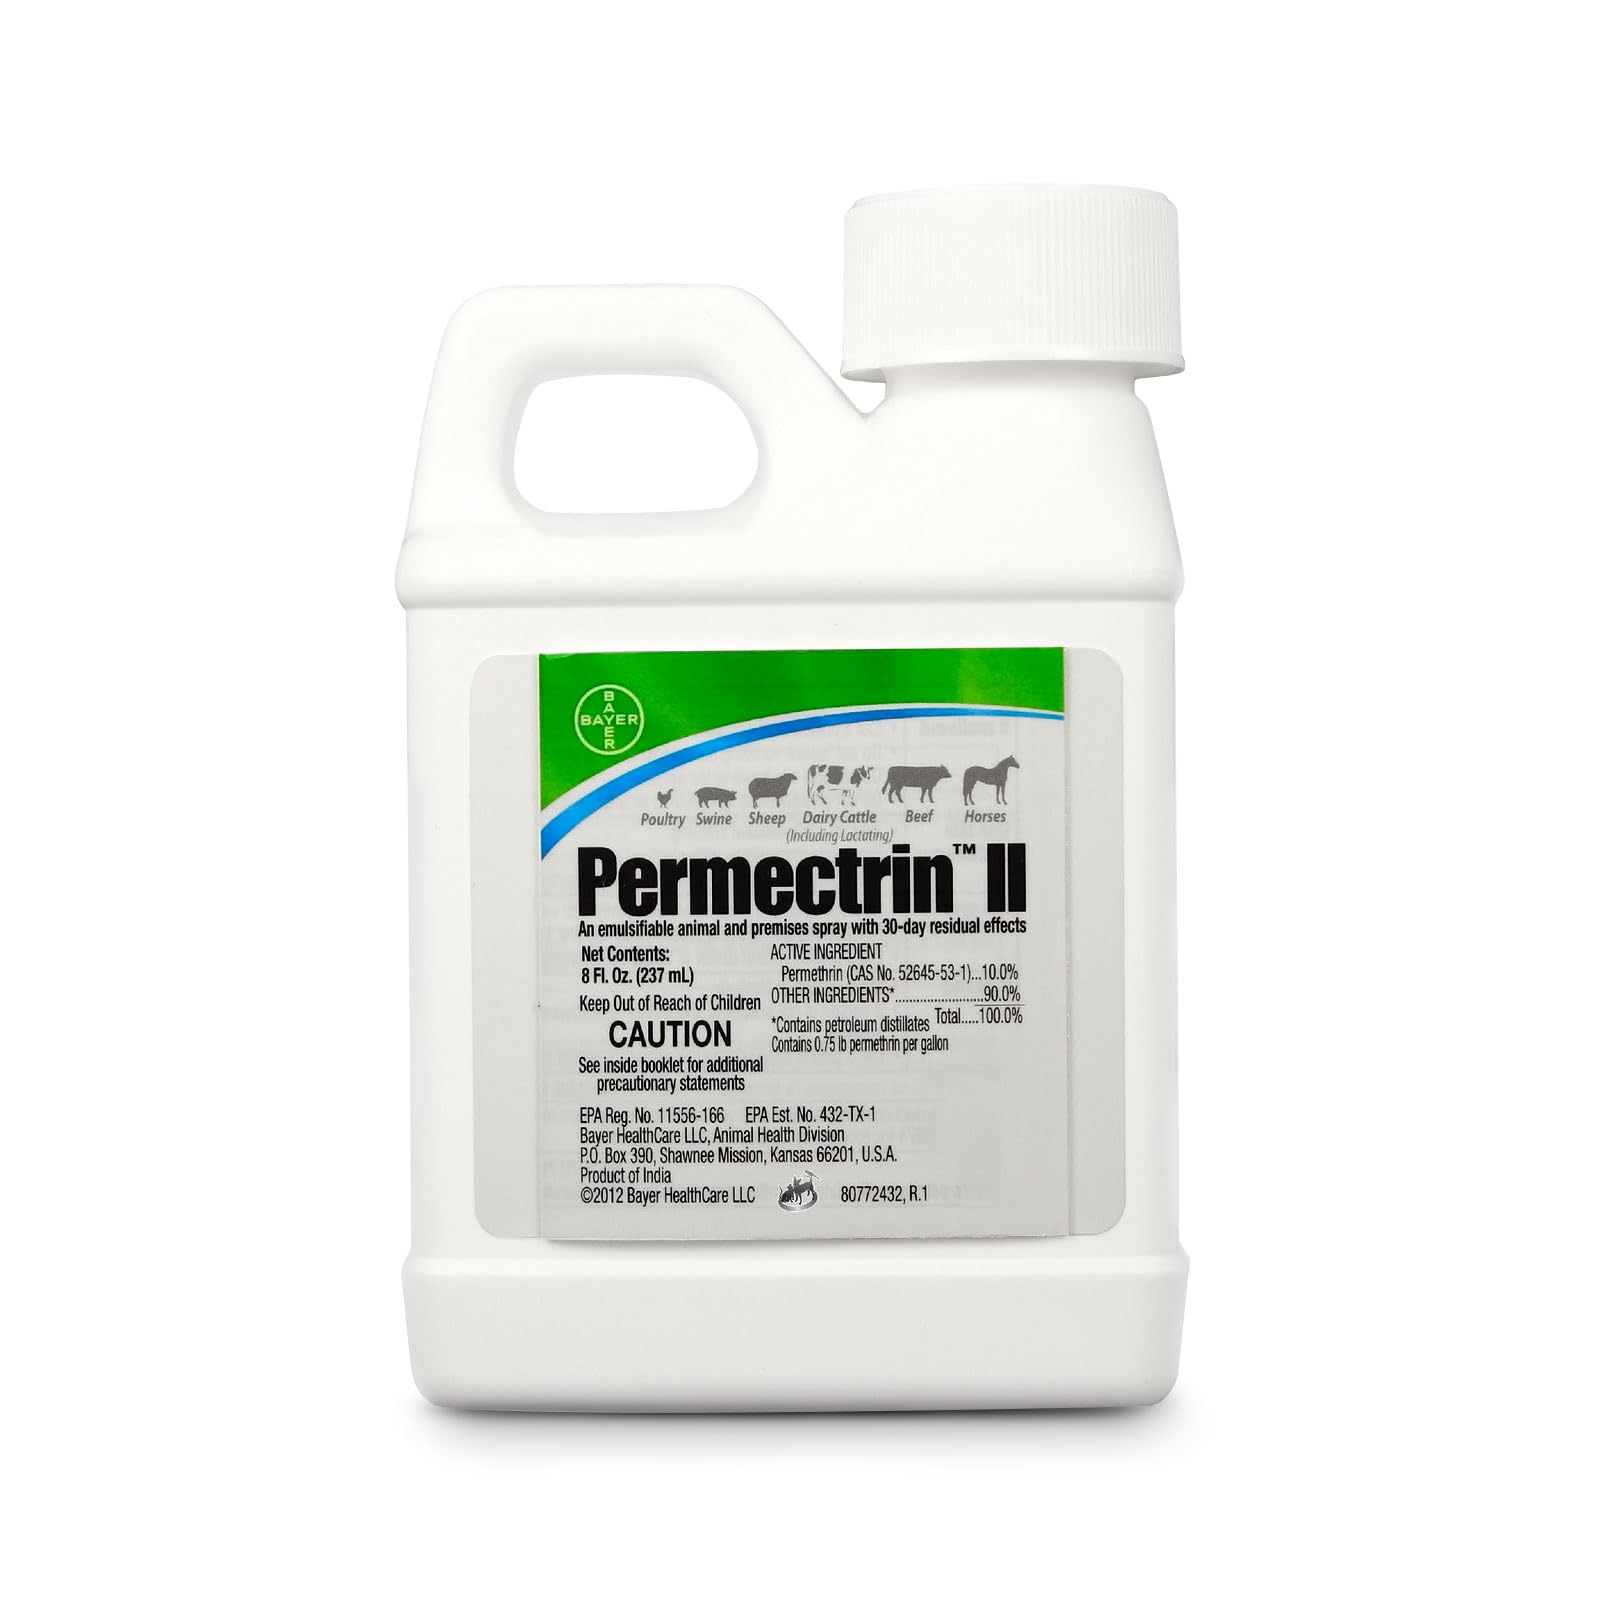 Bayer Permectrin II Spray - 8 oz-Effective Fly and Pest Control for Horses and Livestock- Insect Repellent permectrin- Available with Premium Quality Centaurus AZ Gloves- 8oz